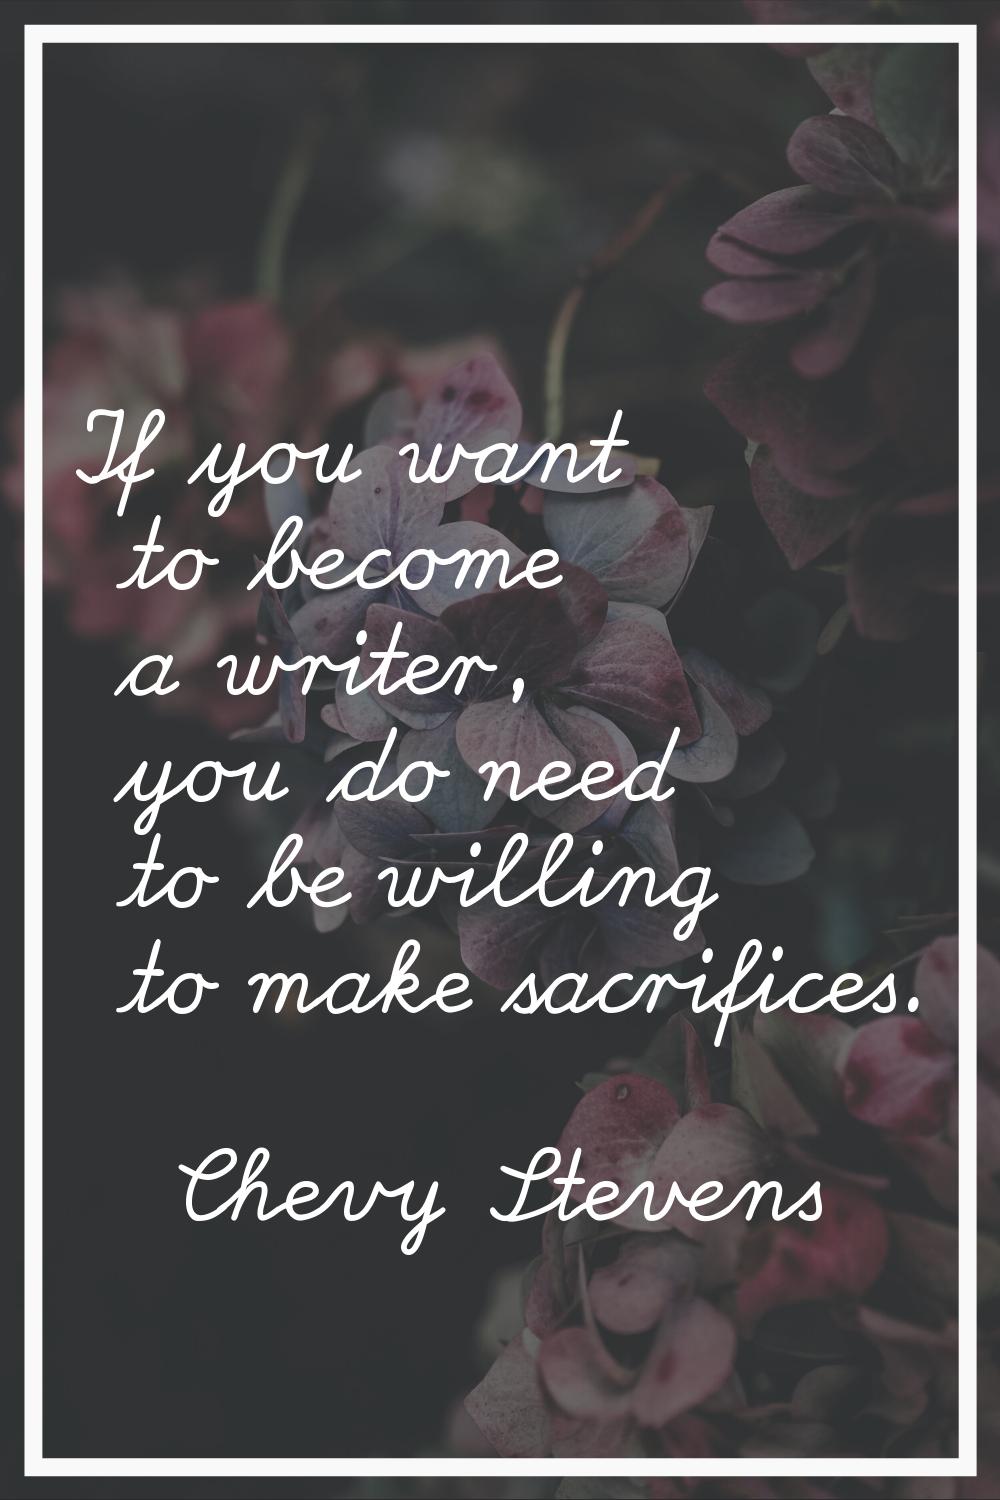 If you want to become a writer, you do need to be willing to make sacrifices.